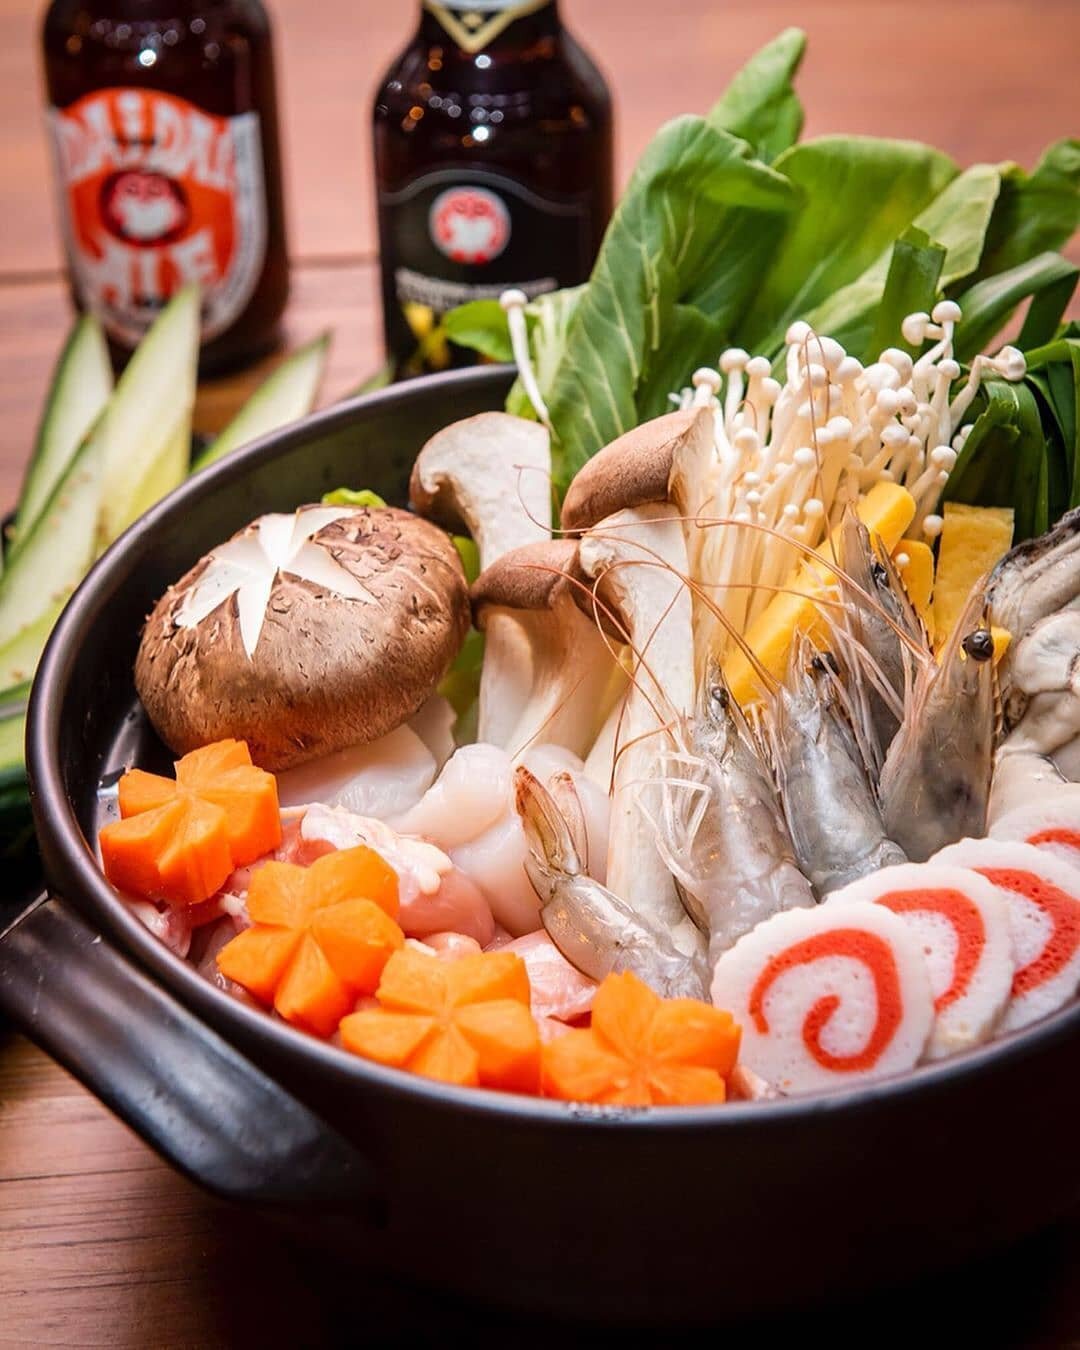 Traditional Sumo Hot Pot, Chanko Nabe is now on this week's Chef's Daily!
Chicken/Pork/Seafood options available! 
Also, you may now order your food to your doorstep on our website too!
Stay tuned for more great news and deals!
➡️For our menu &amp; r